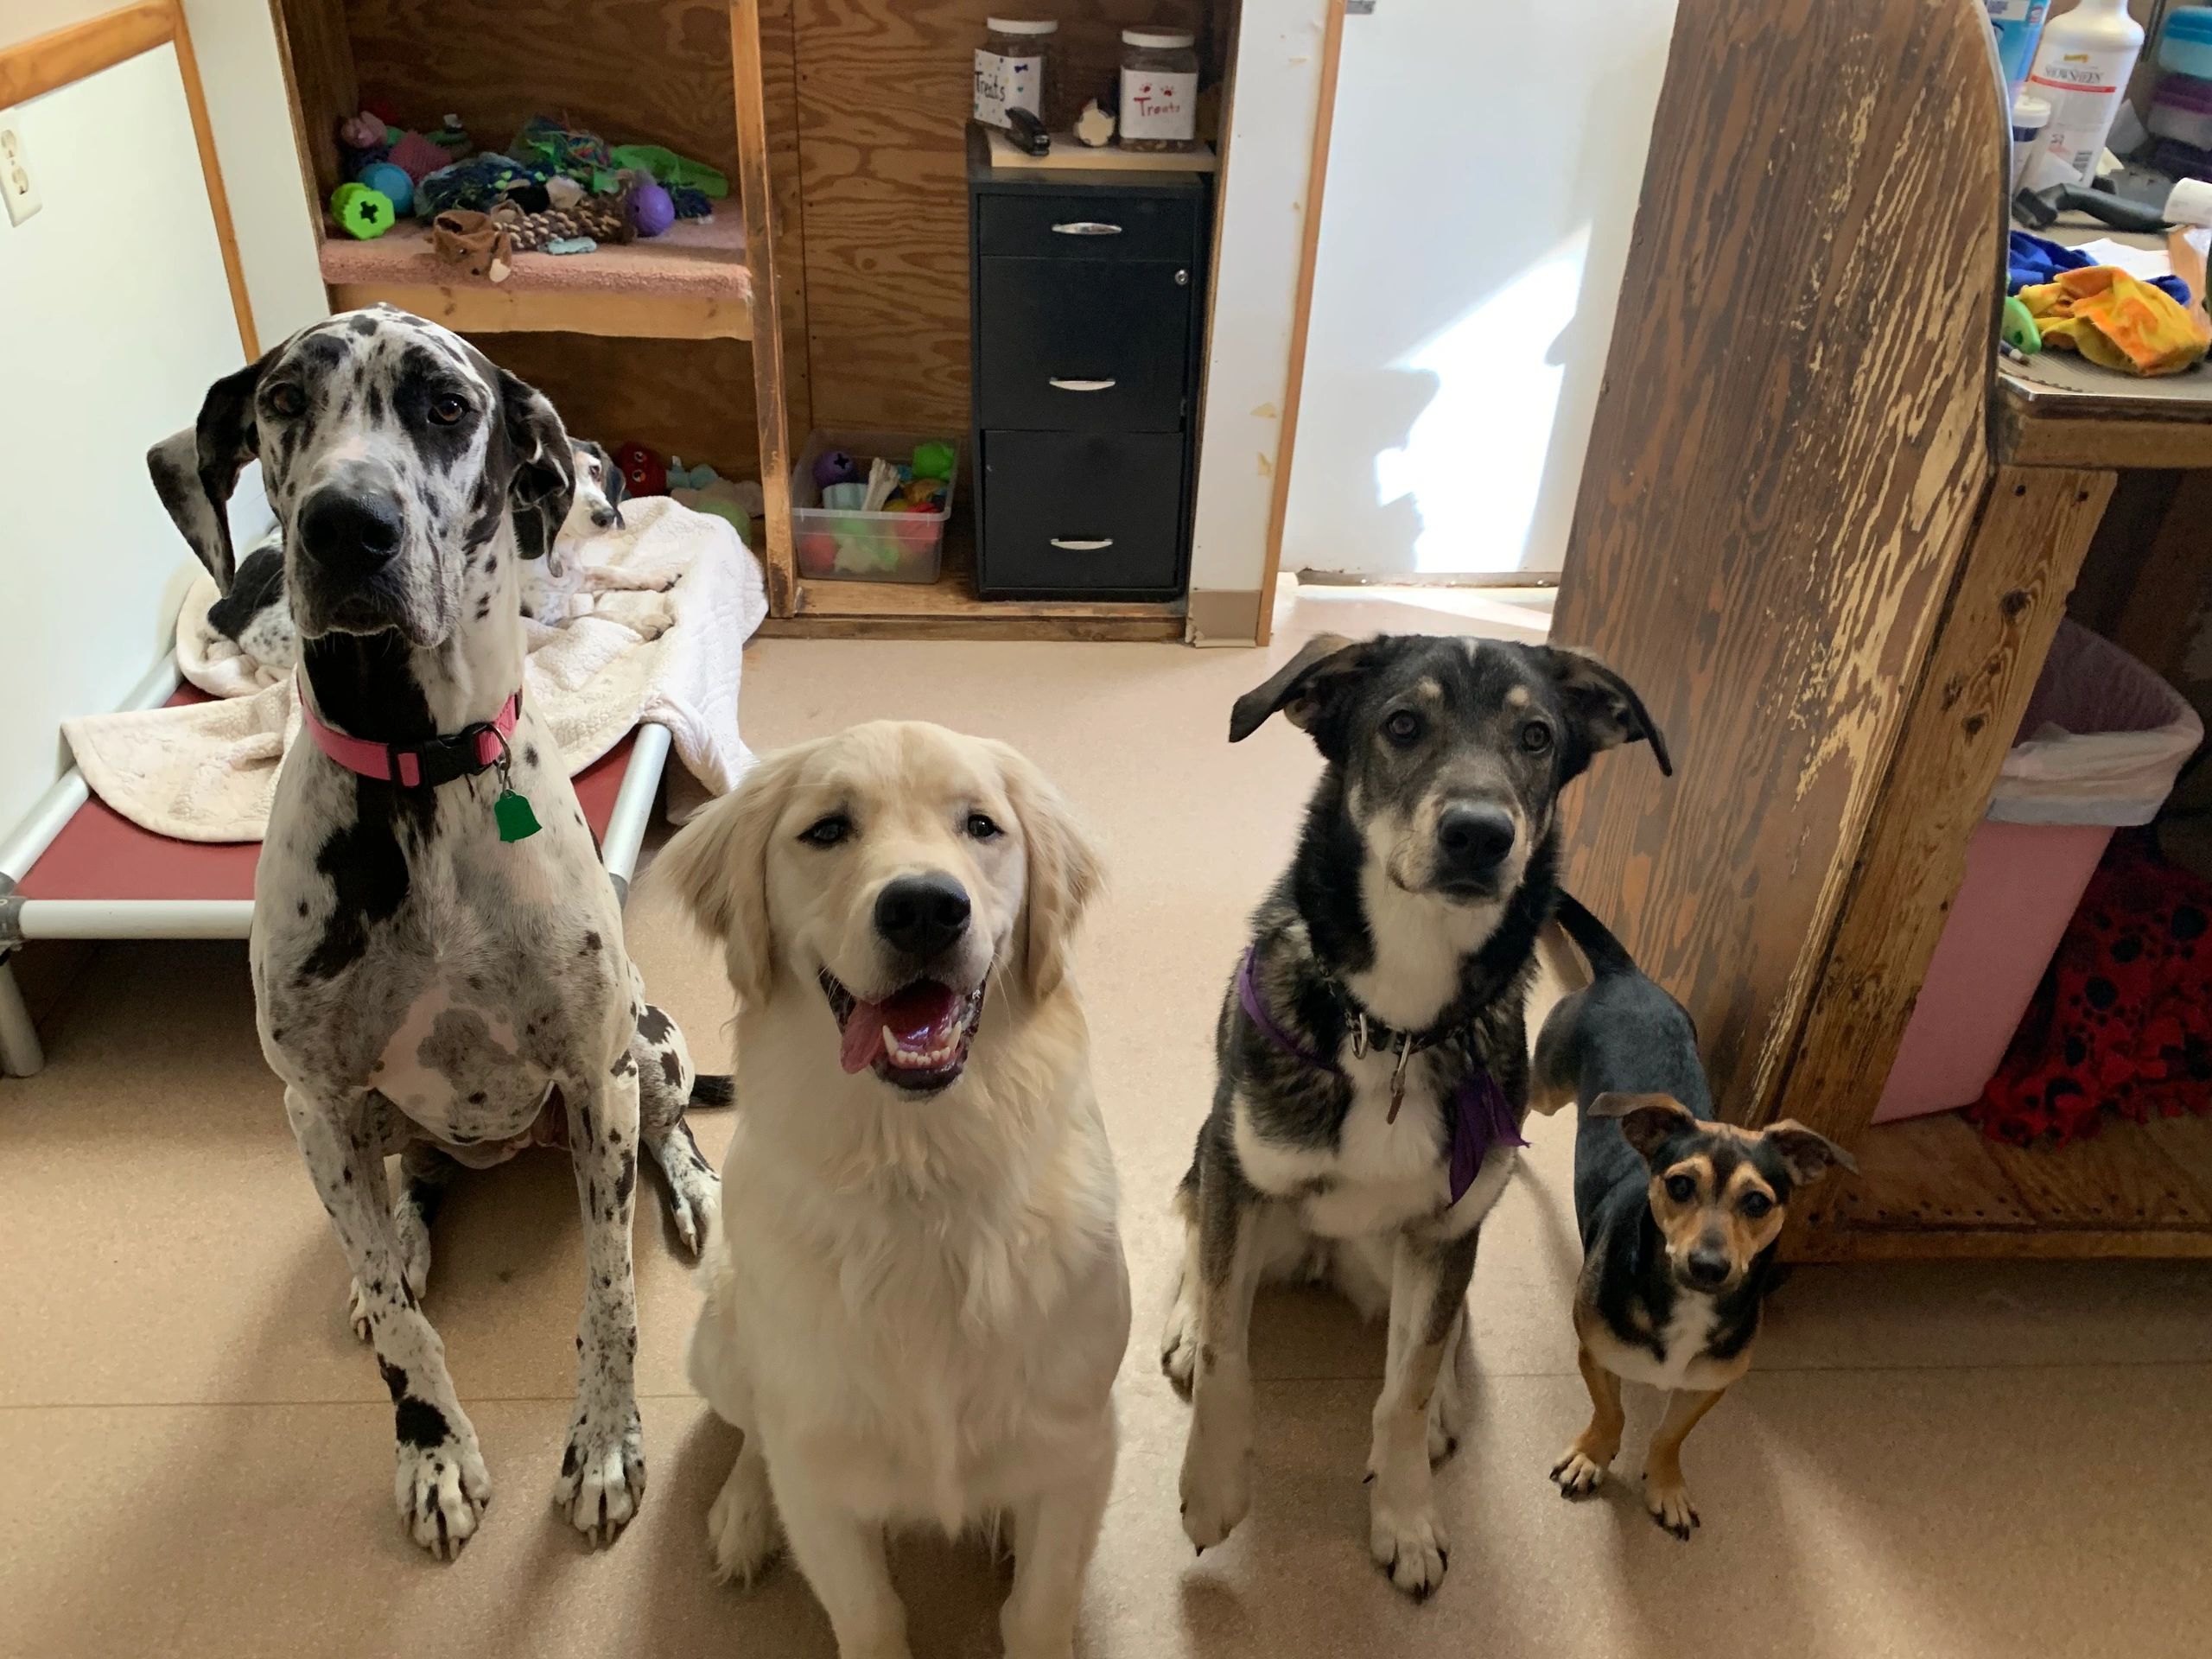 Narnia (Great Dane), Ozzy (Golden Retriever), Keanu (Husky Mix), and DJ (Chi Mix) hanging out. 